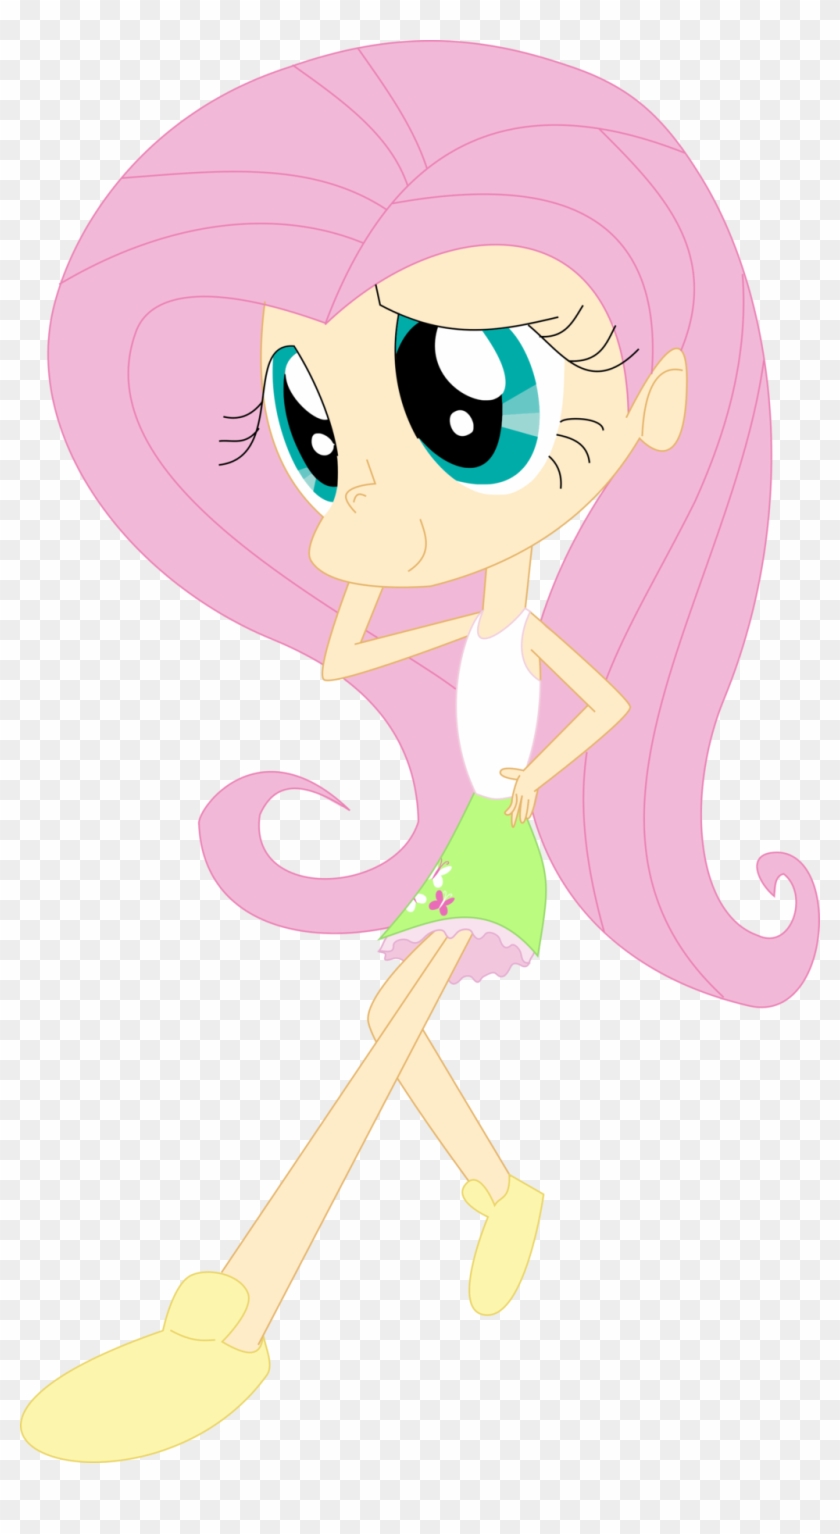 Fluttershy With Equestria Girl`s Dress By Michaelsety - Fluttershy #776698